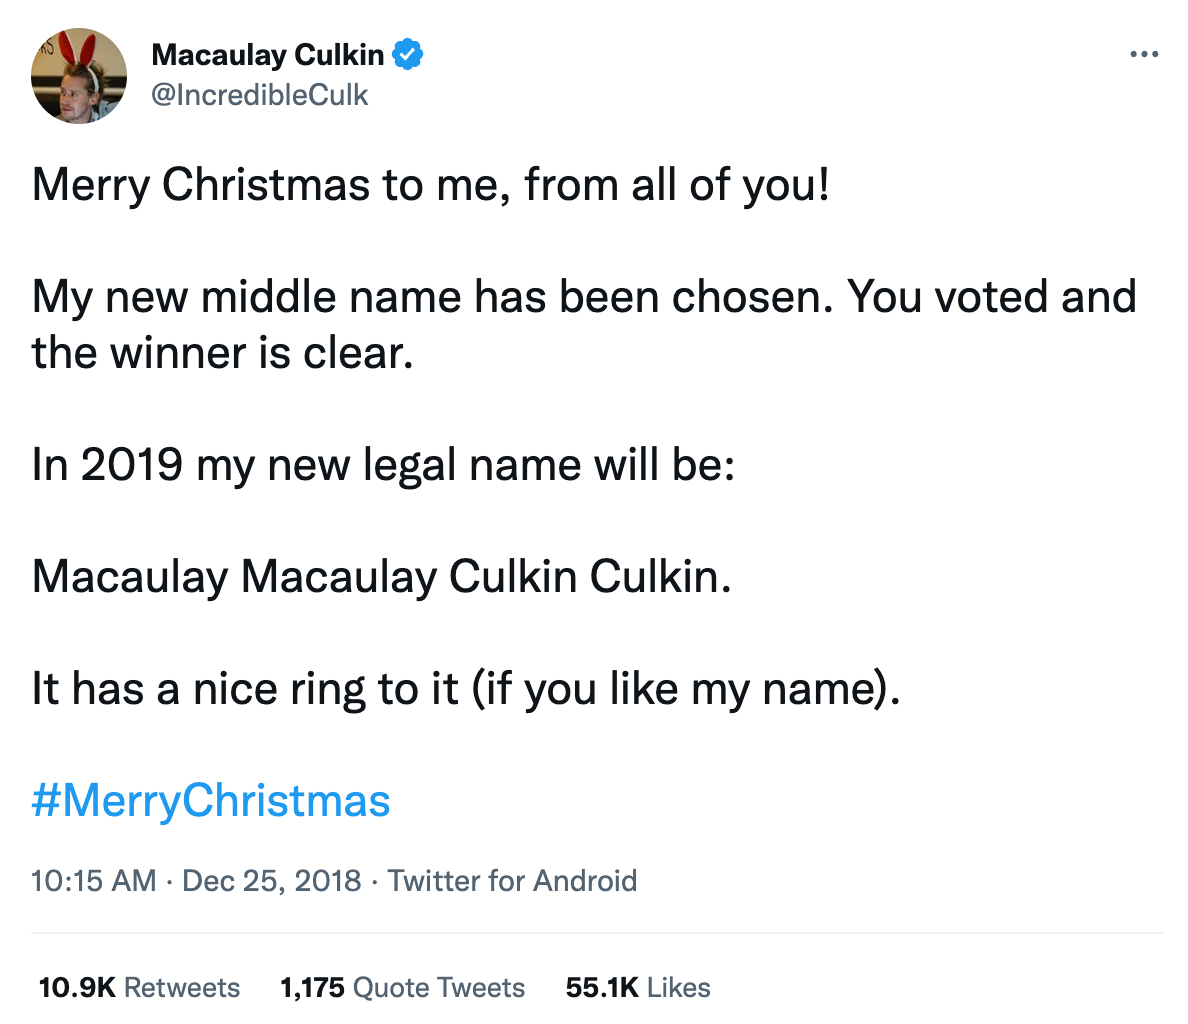 Tweet in which Macaulay Culkin says Merry Christmas to me, from all of you! My new middle name has been chosen. You voted and the winner is clear. In 2019 my new legal name will be: Macaulay Macaulay Culkin Culkin. It has a nice ring to it (if you like my name).